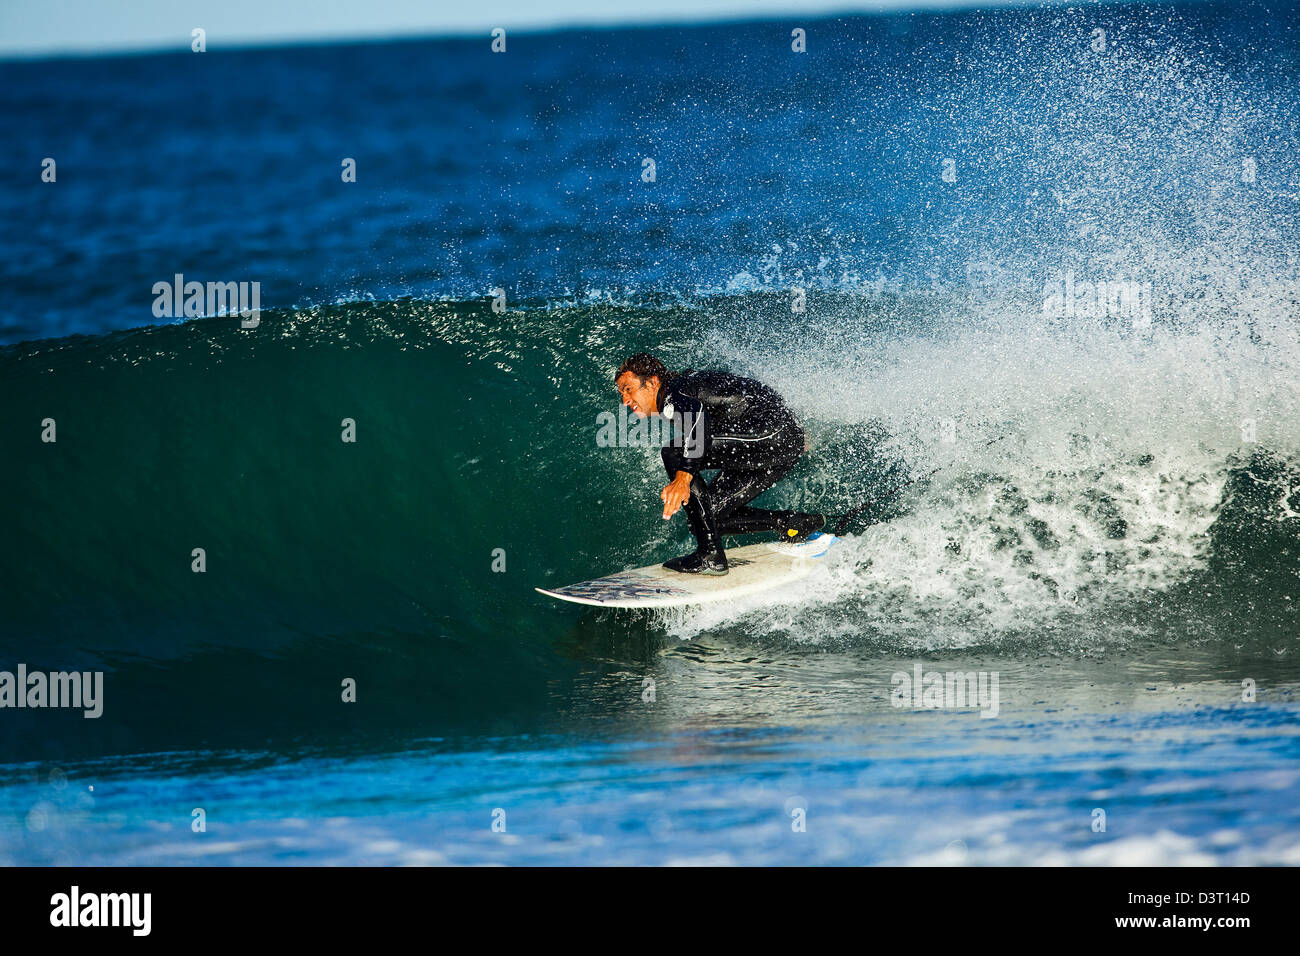 Surfing action, man on wave, Jeffreys Bay, South Africa Stock Photo